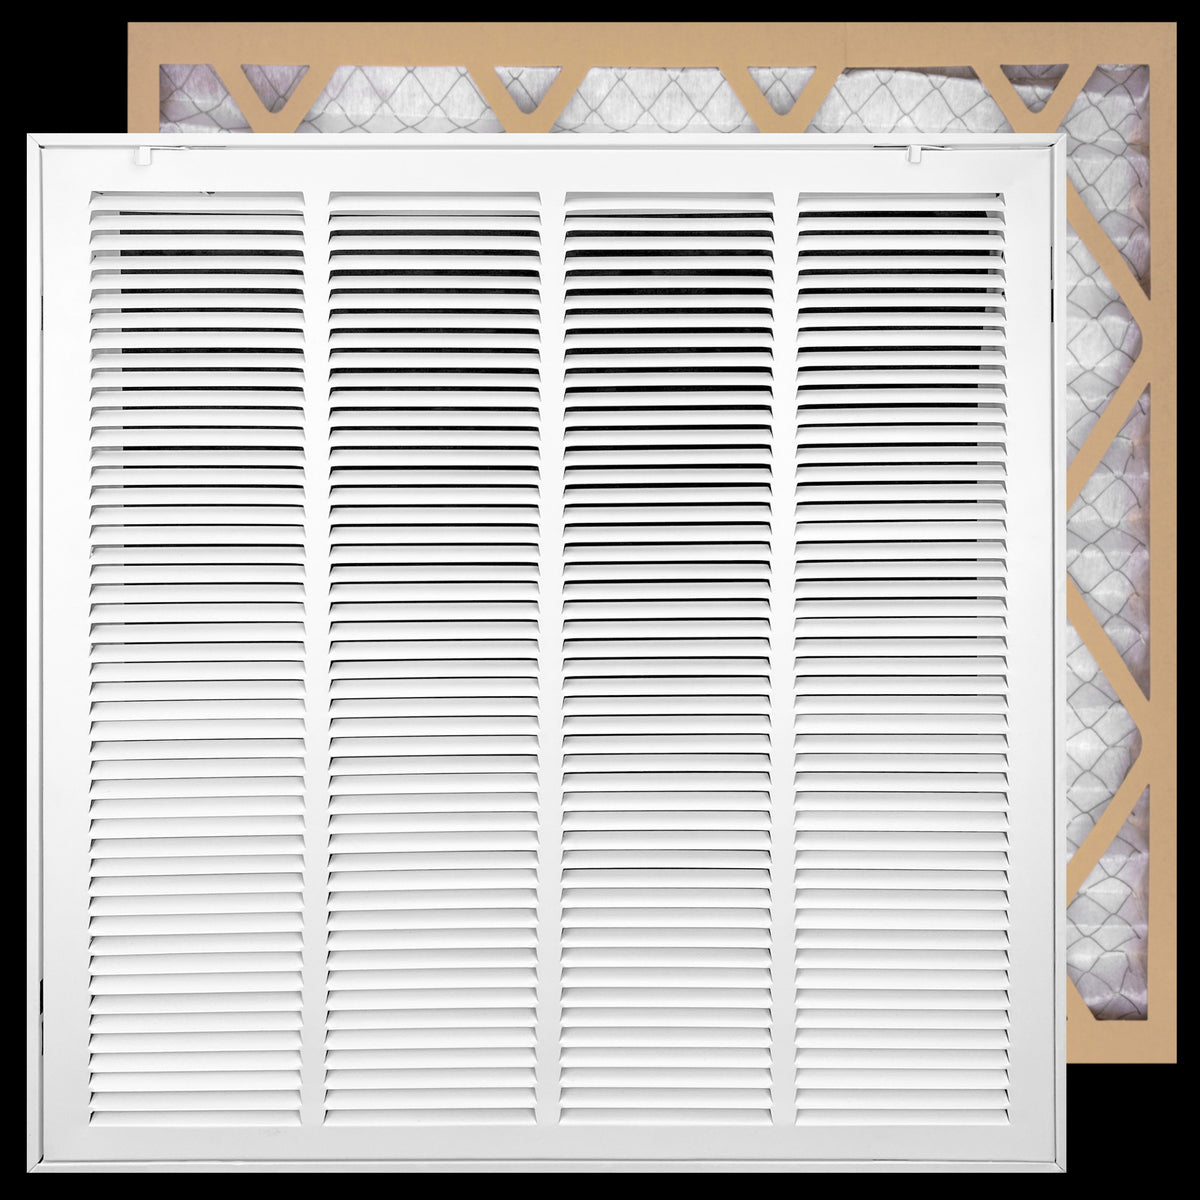 airgrilles 24" x 24" duct opening   filter included hd steel return air filter grille for sidewall and ceiling fil-7rafg1-wh-24x24 038775643962 - 1